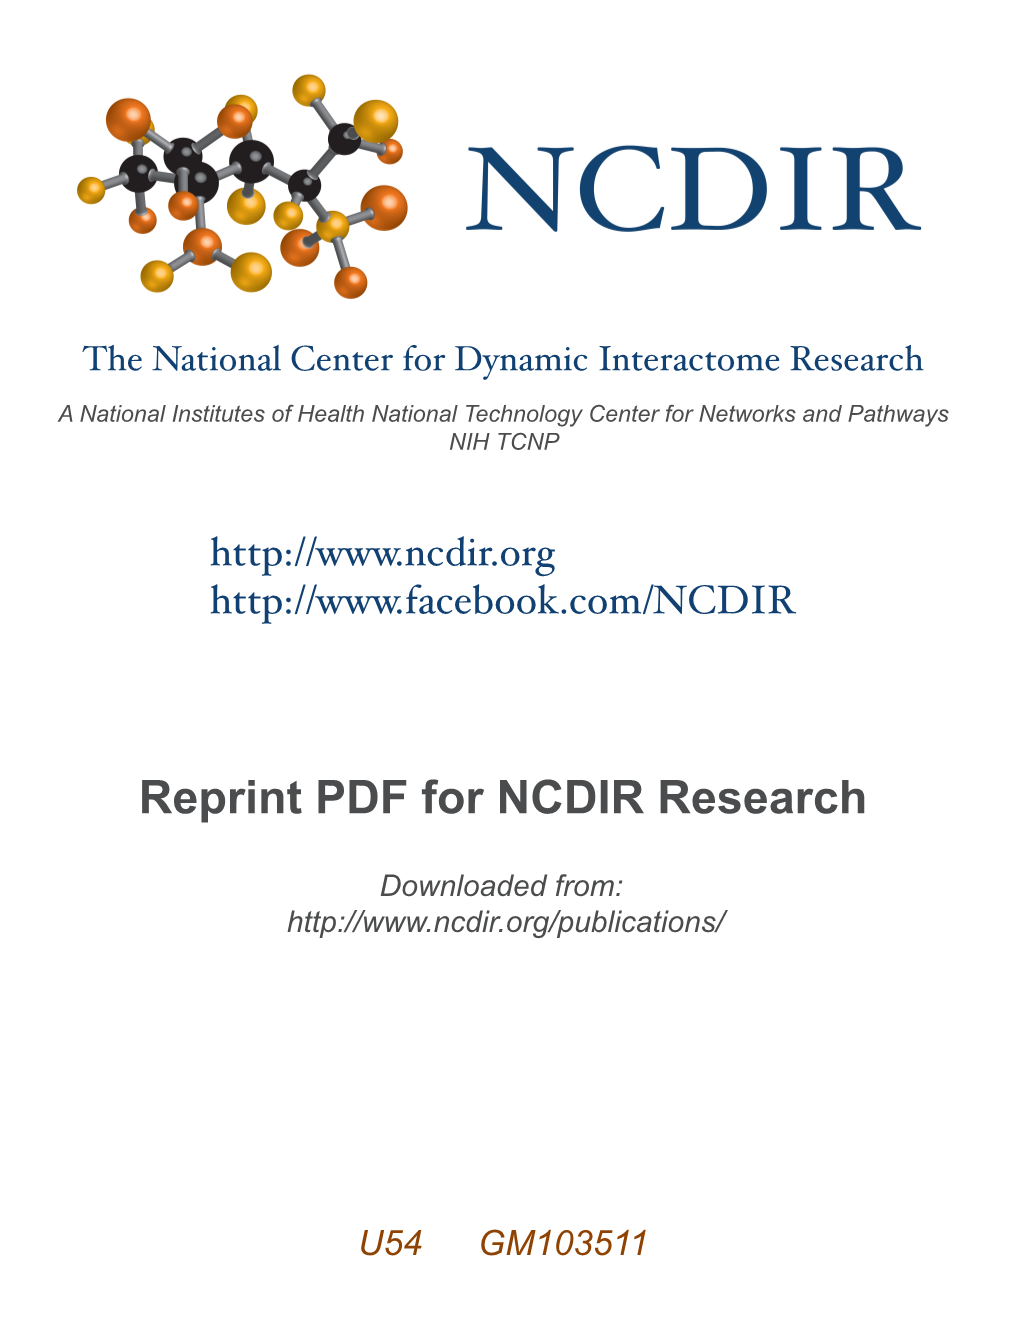 Reprint PDF for NCDIR Research